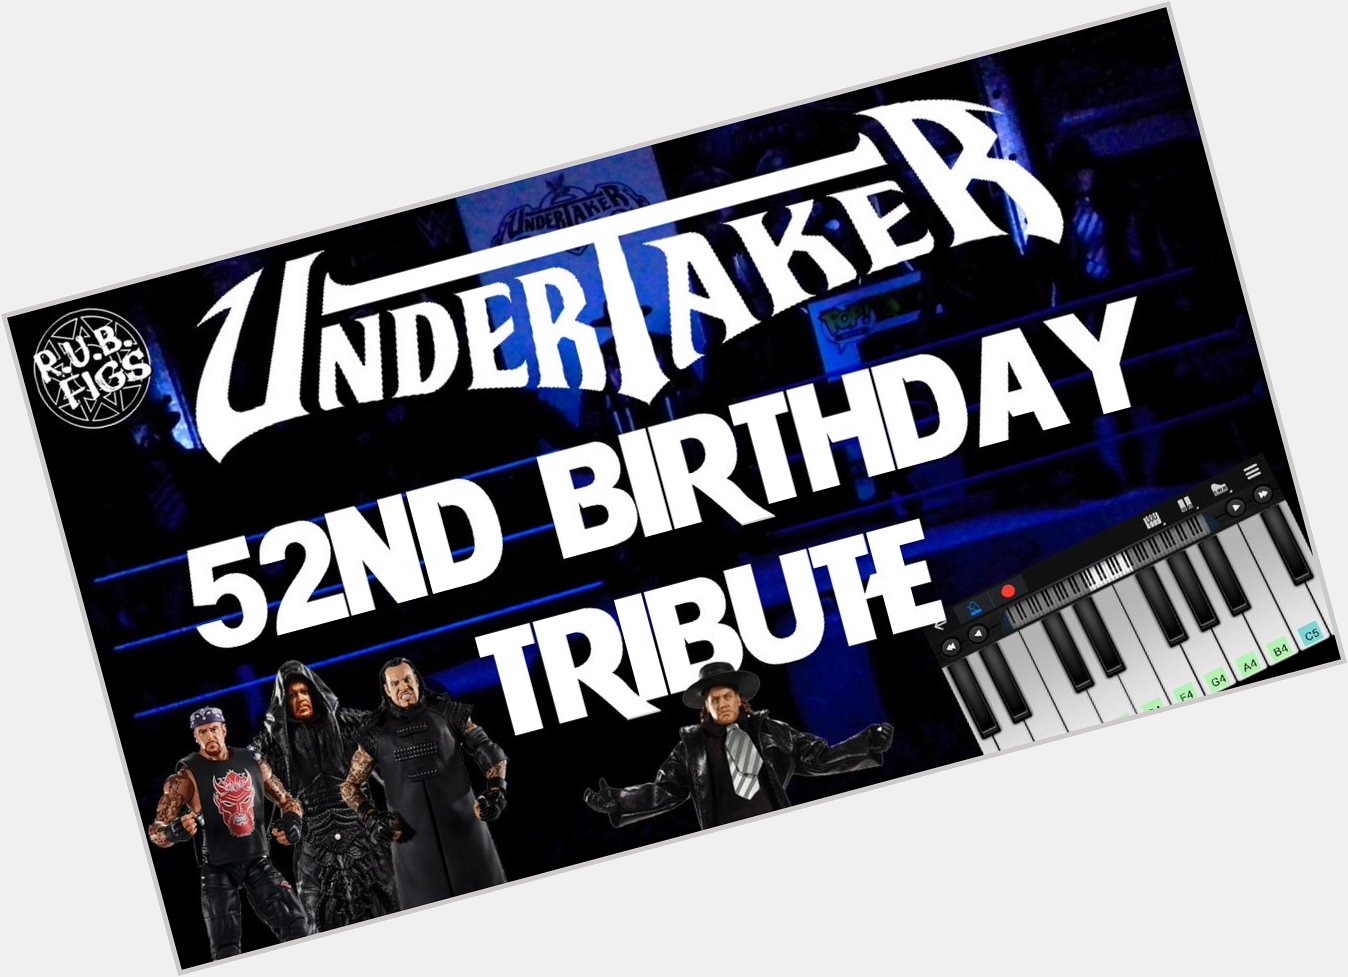 HAPPY 52ND BIRTHDAY UNDERTAKER TRIBUTE! PIANO, FIGURE COLLECTION:
 